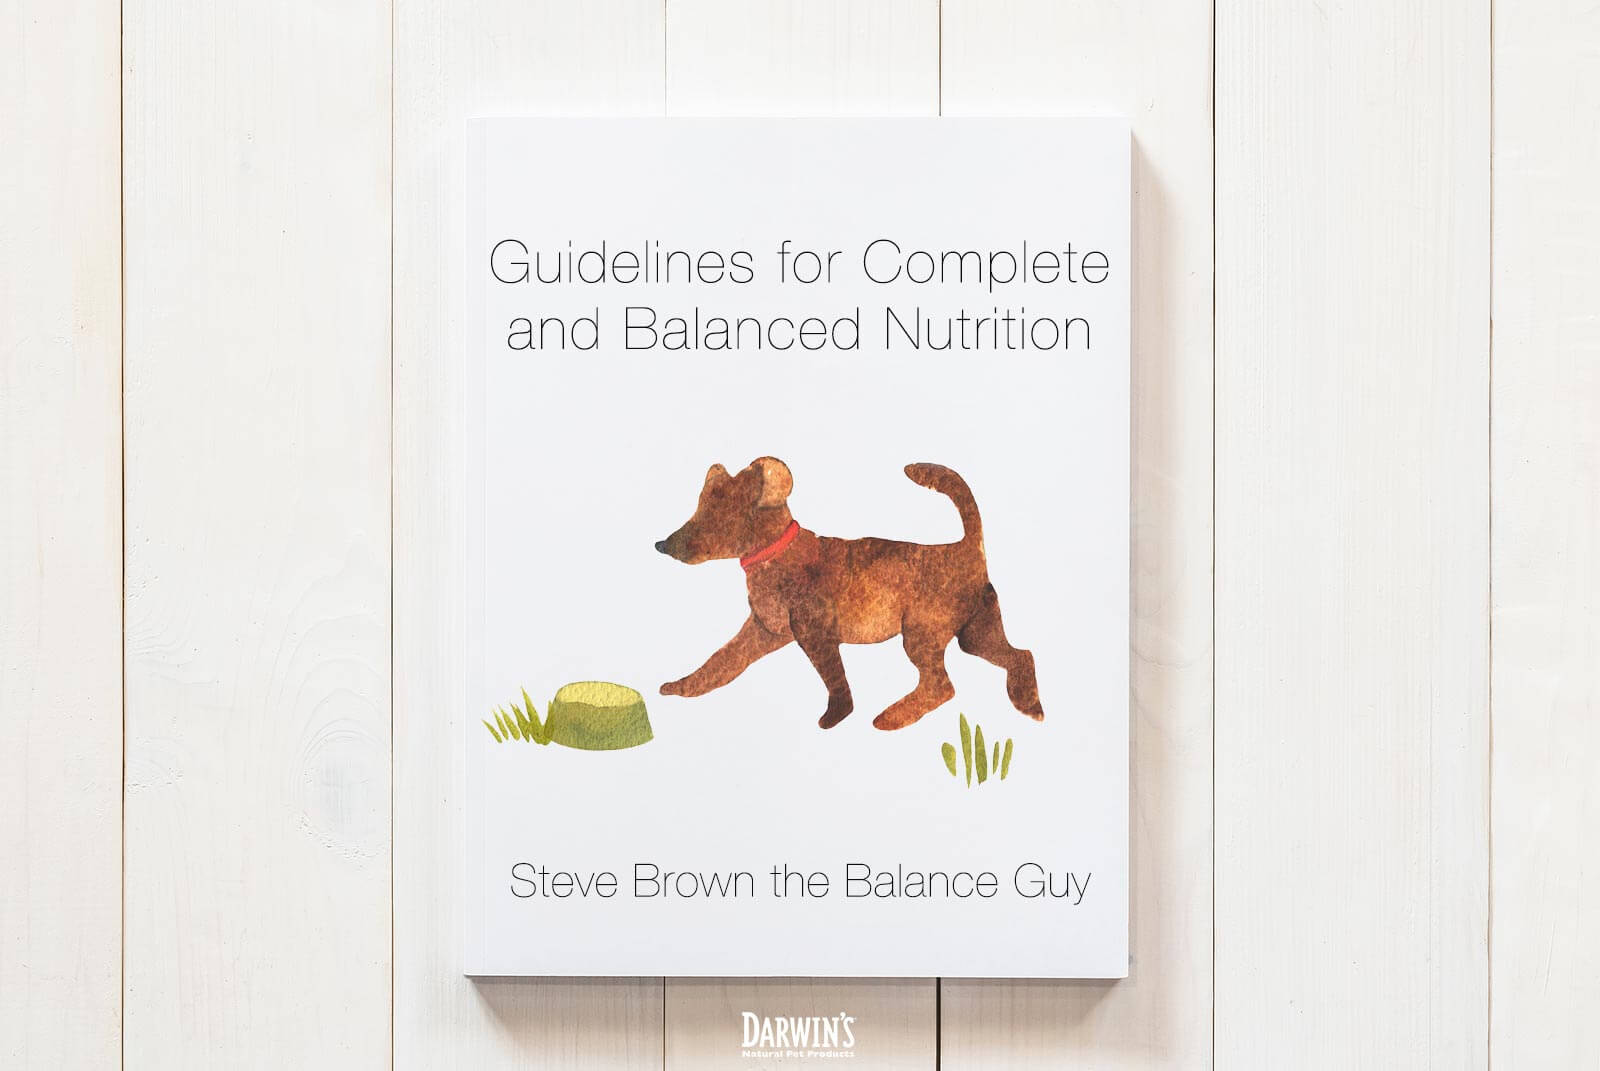 Guidelines for Making a Complete and Balanced Diet for Dogs